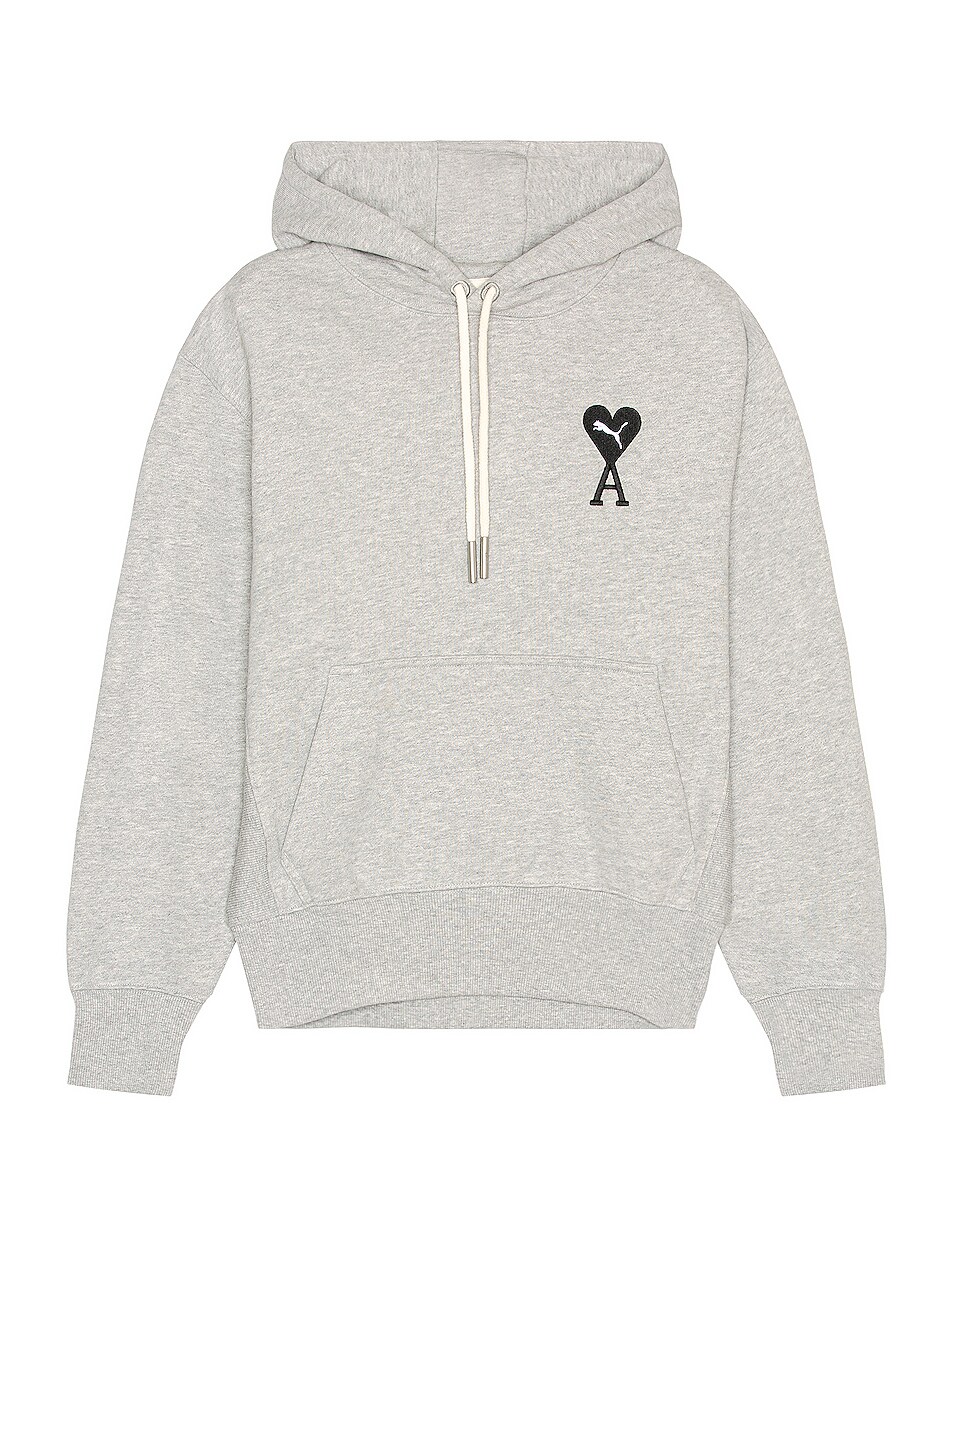 Image 1 of Puma Select AMI Hoodie in Light Gray Heather